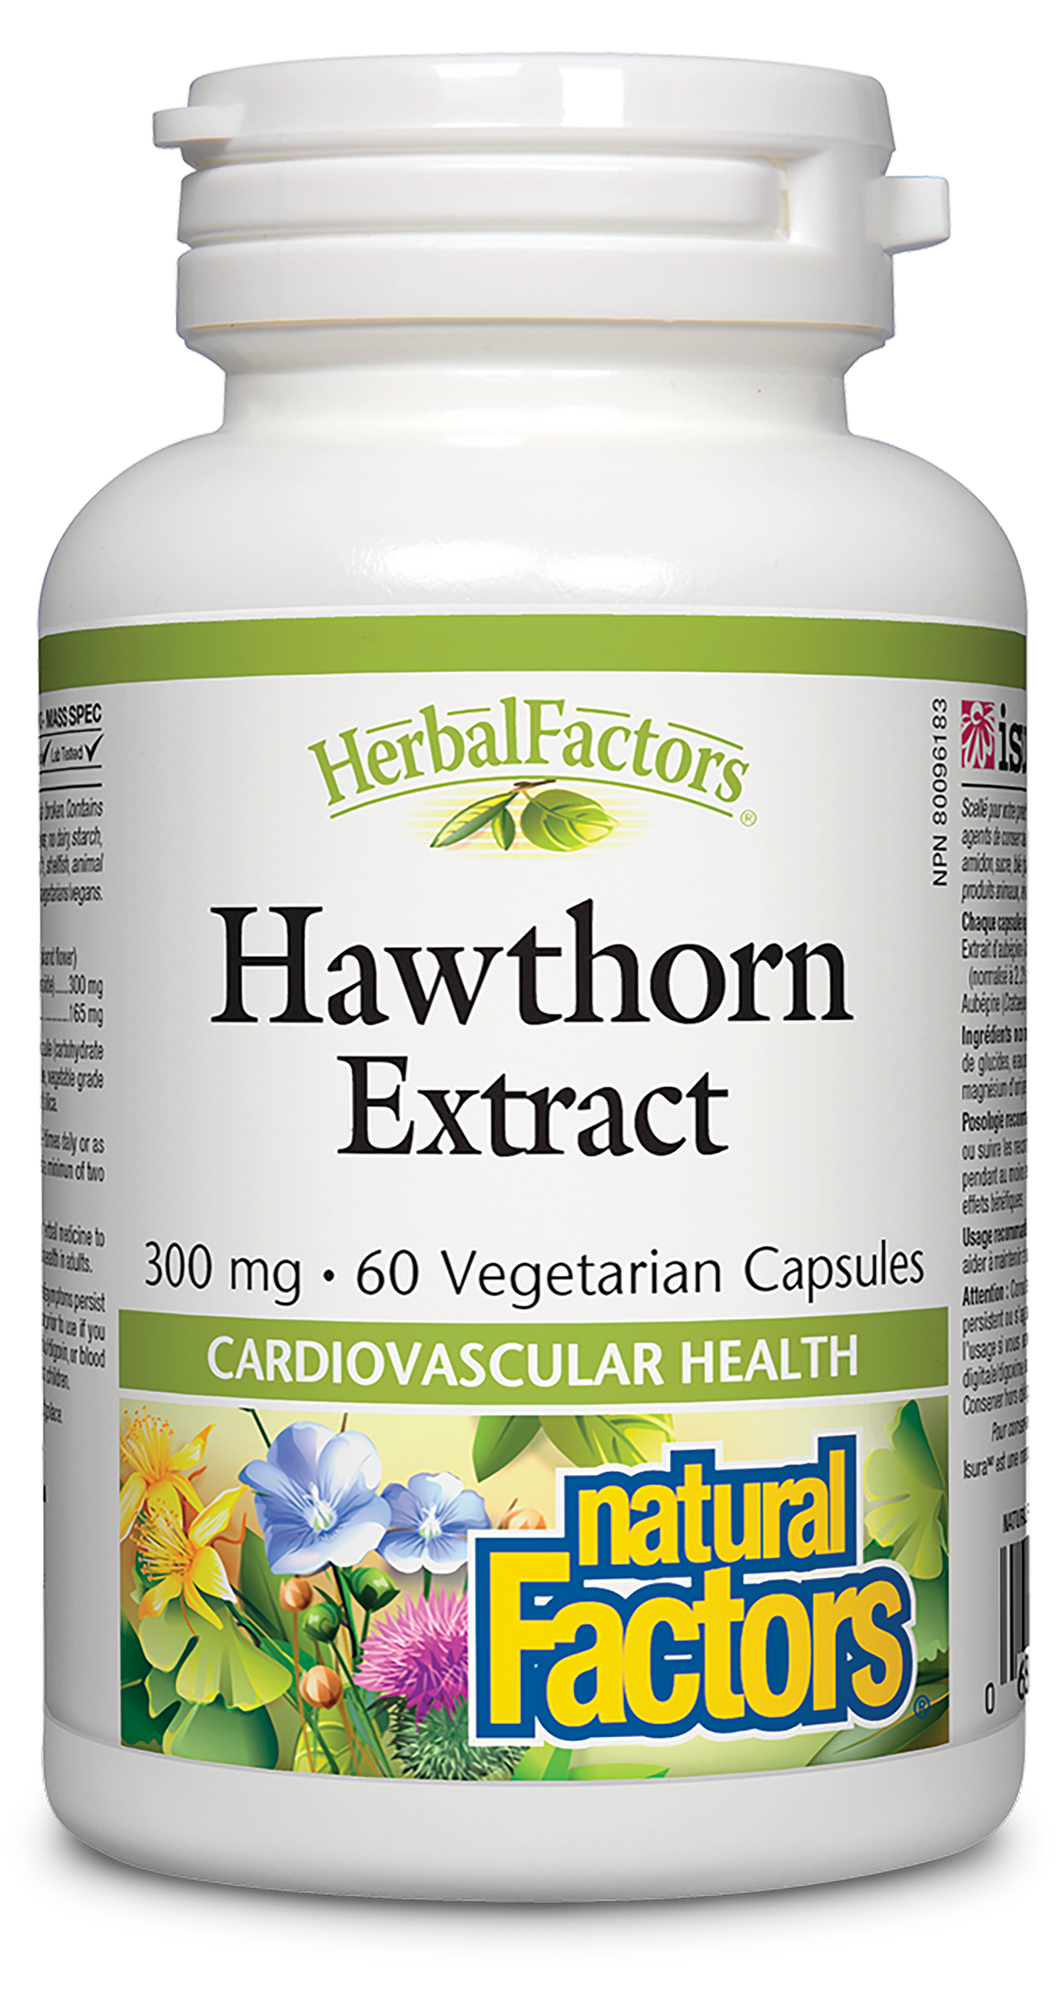 Hawthorn Extract from Herbal Factors® combines hawthorn leaf, flower, and berry, which are used traditionally in herbal medicine to help maintain cardiovascular health in adults. It provides a full spectrum of hawthorn’s antioxidants, standardized to 2.2% flavonoids. This is a fantastic herbal supplement for anyone who wants to support heart function naturally. 